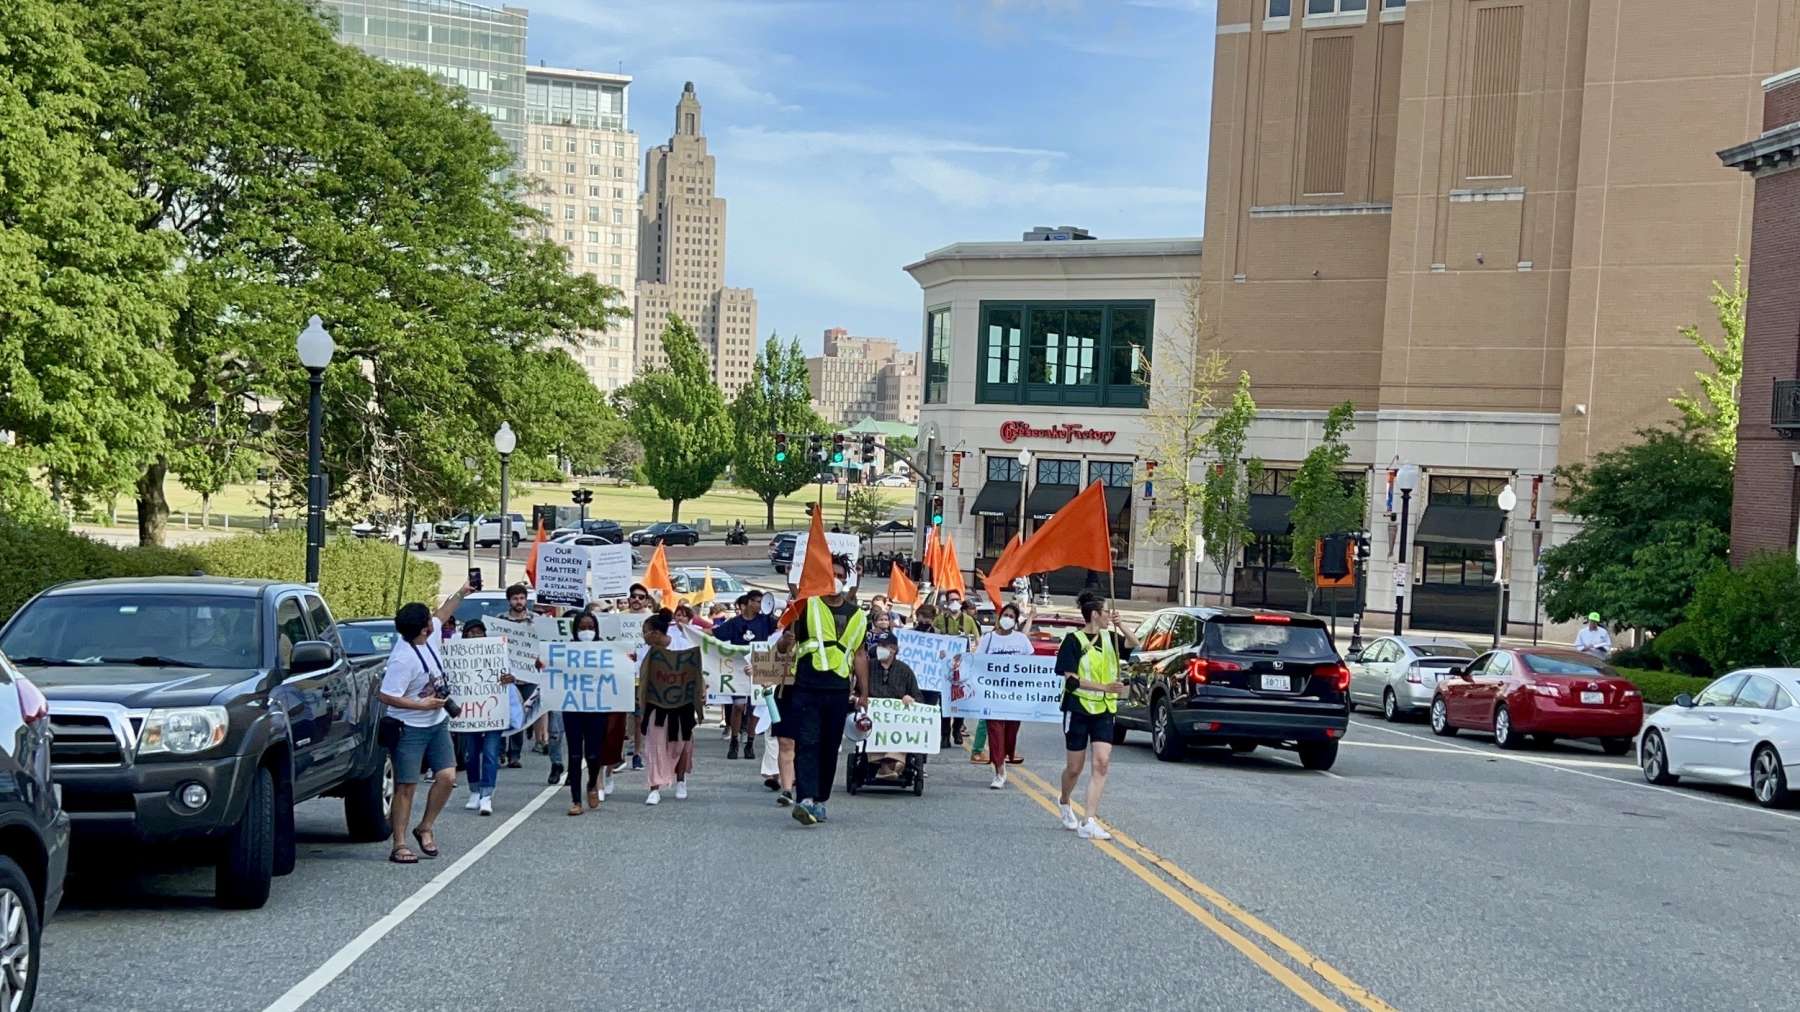 Rhode Island News: Activists rally at RI State House to end mass criminalization